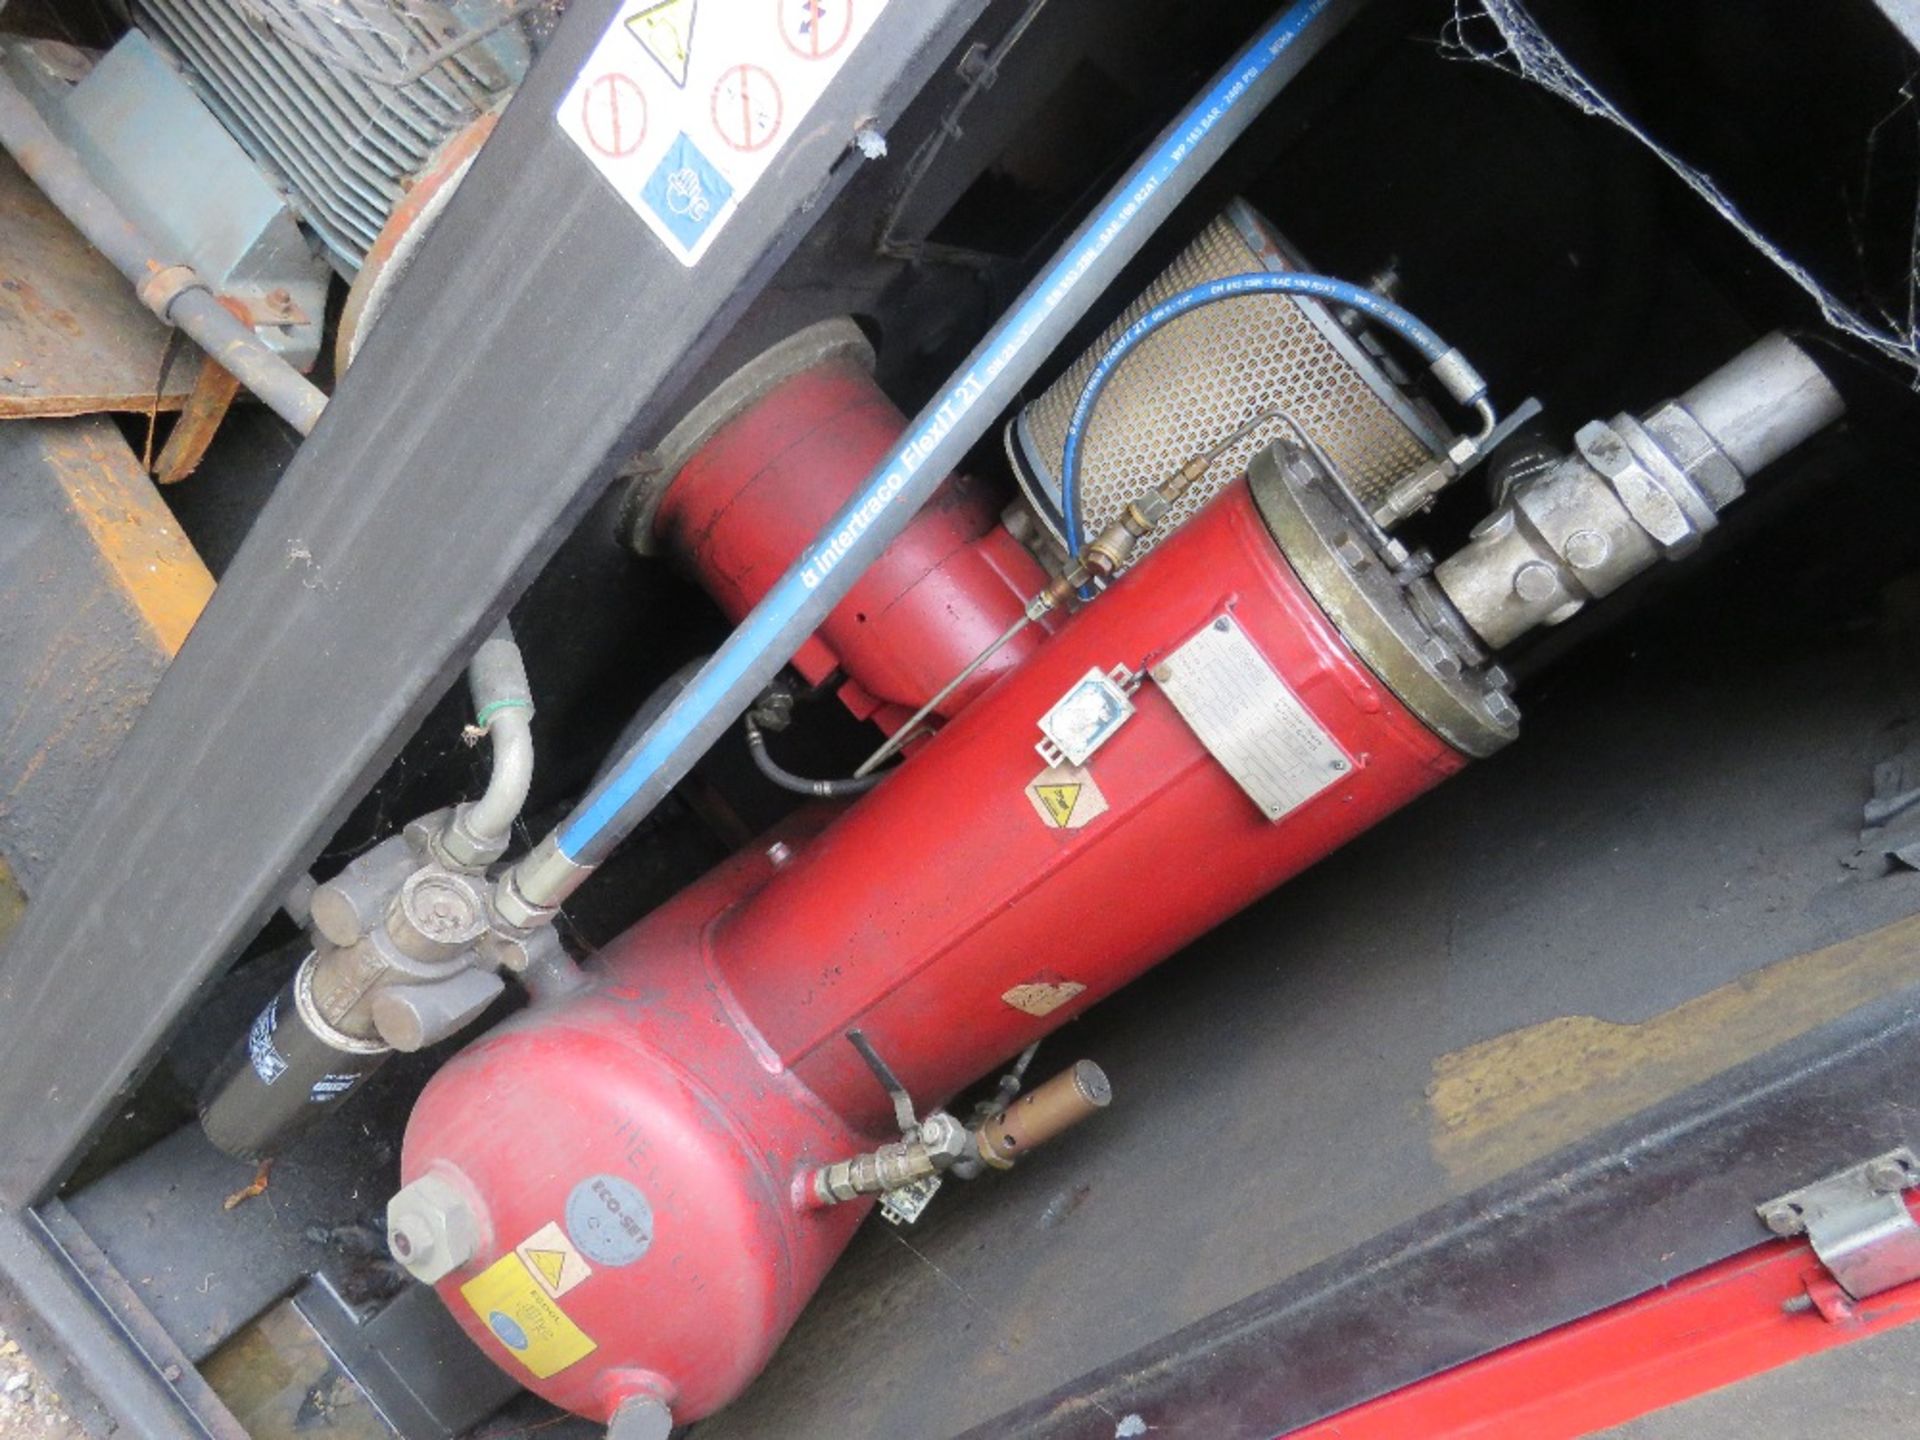 ECOAIR D75 LARGE SIZED PACKAGED AIR COMPRESSOR. SOURCED FROM SITE CLOSURE. - Image 4 of 6